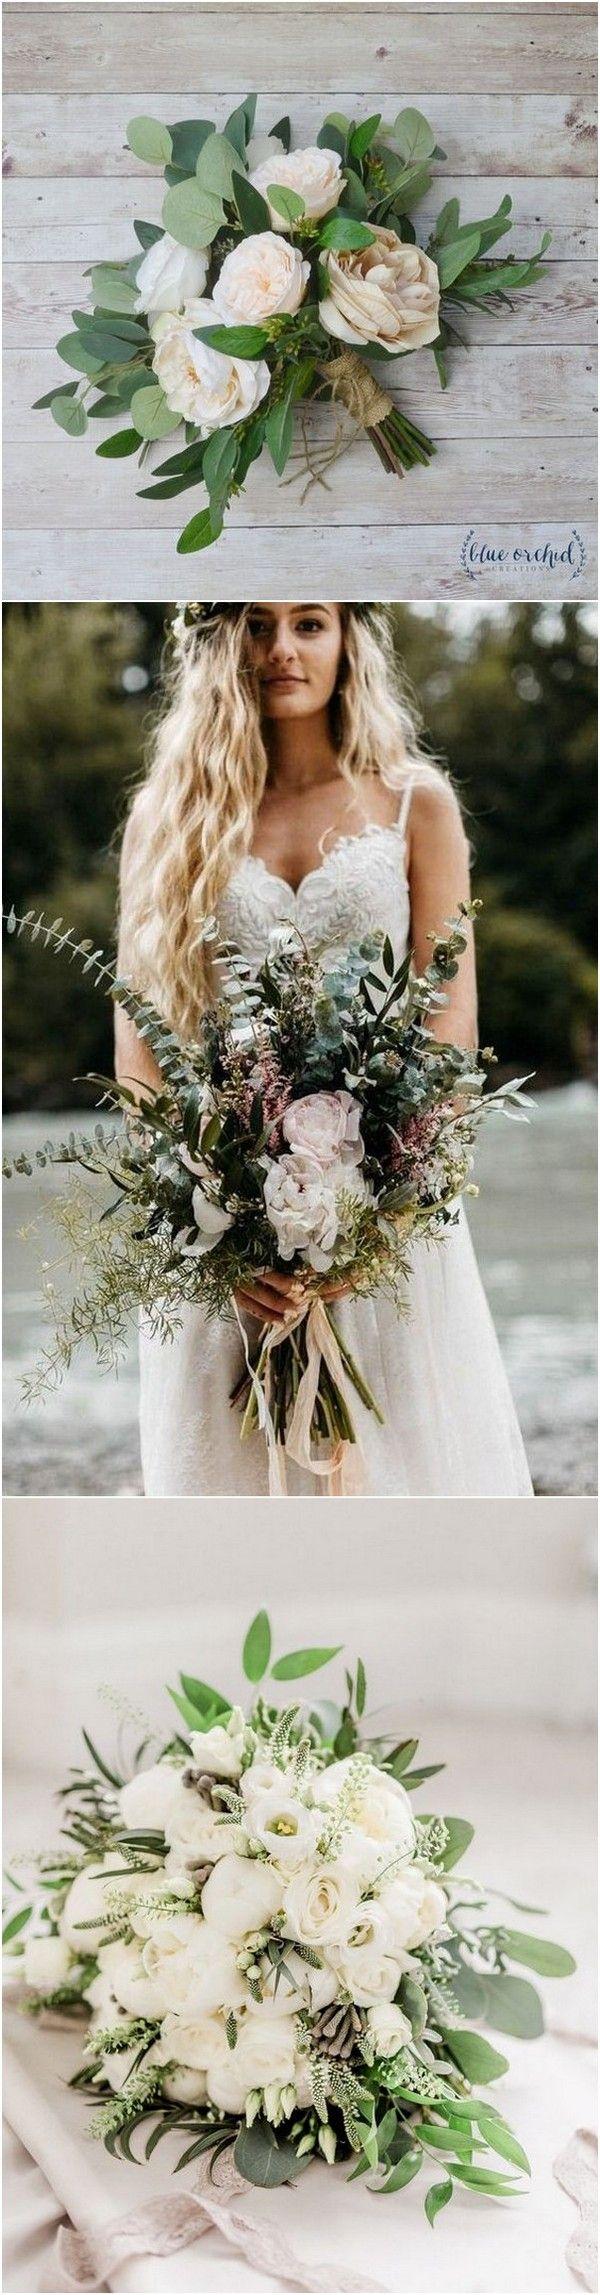 Wedding - 18 Charming Neutral Wedding Bouquets For 2018 Trends